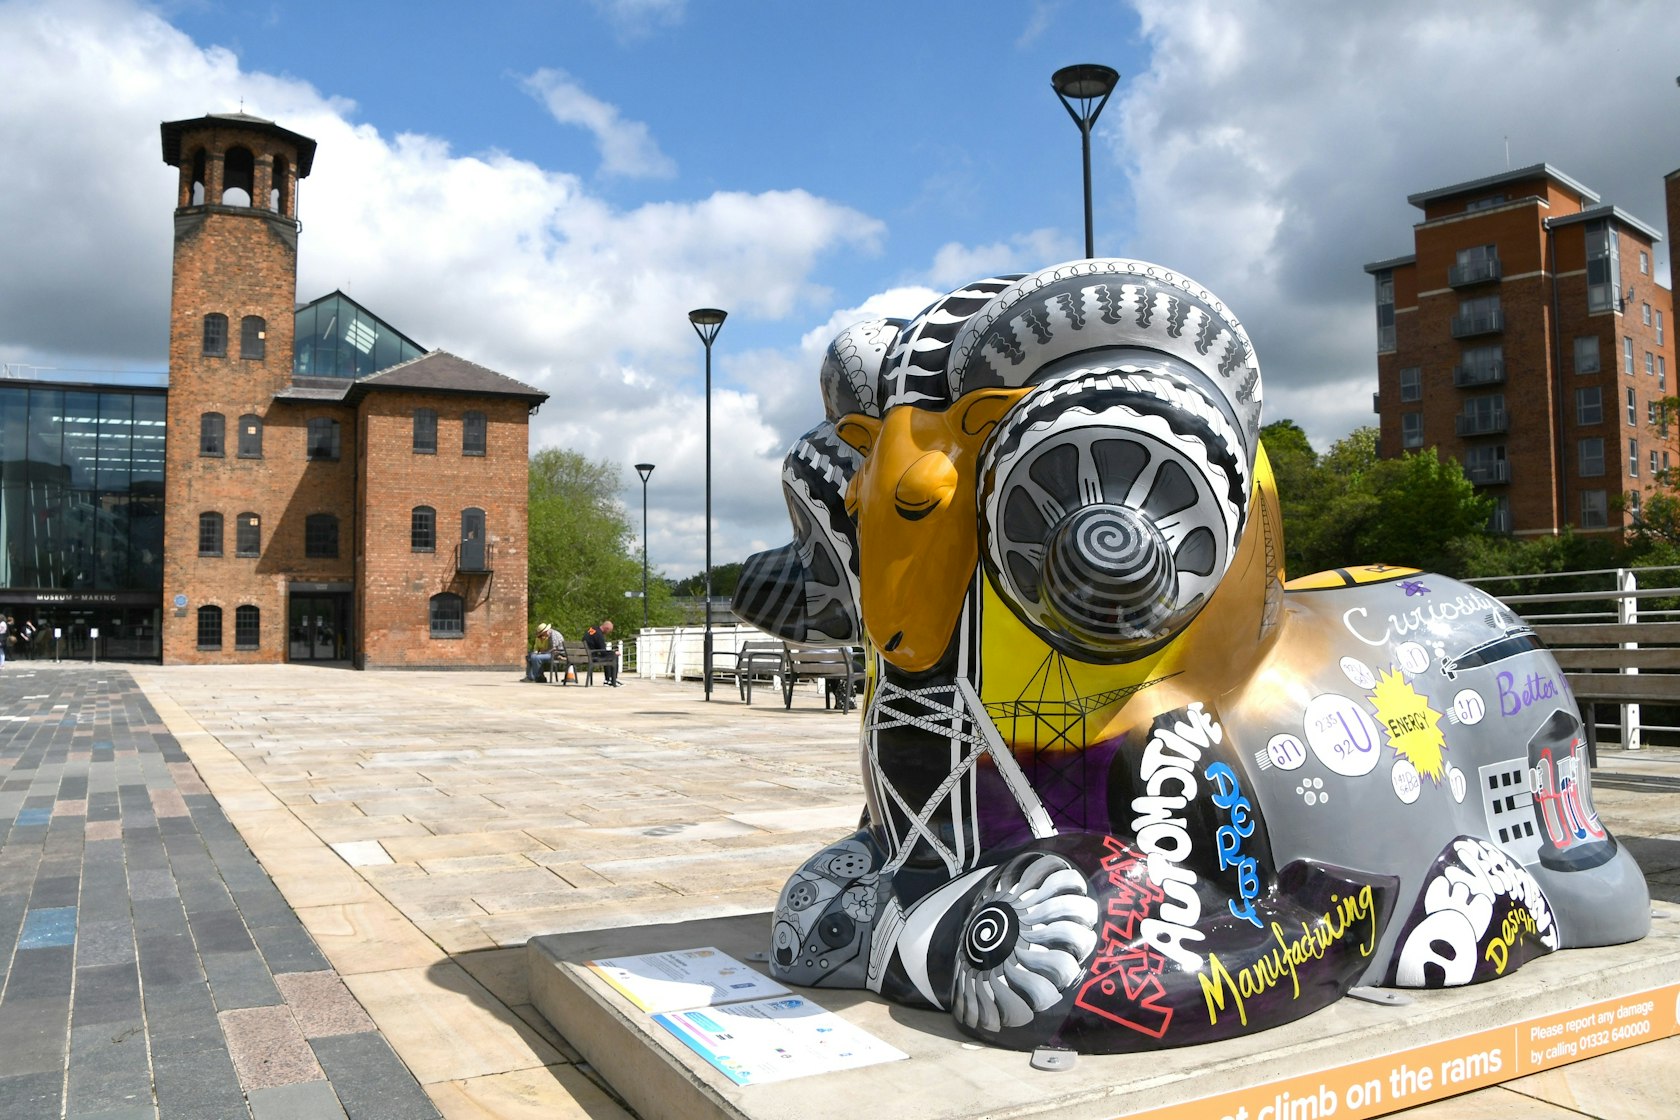 Derby Industries Ram by Sarita Gnaniah, image [c] Derby Museums